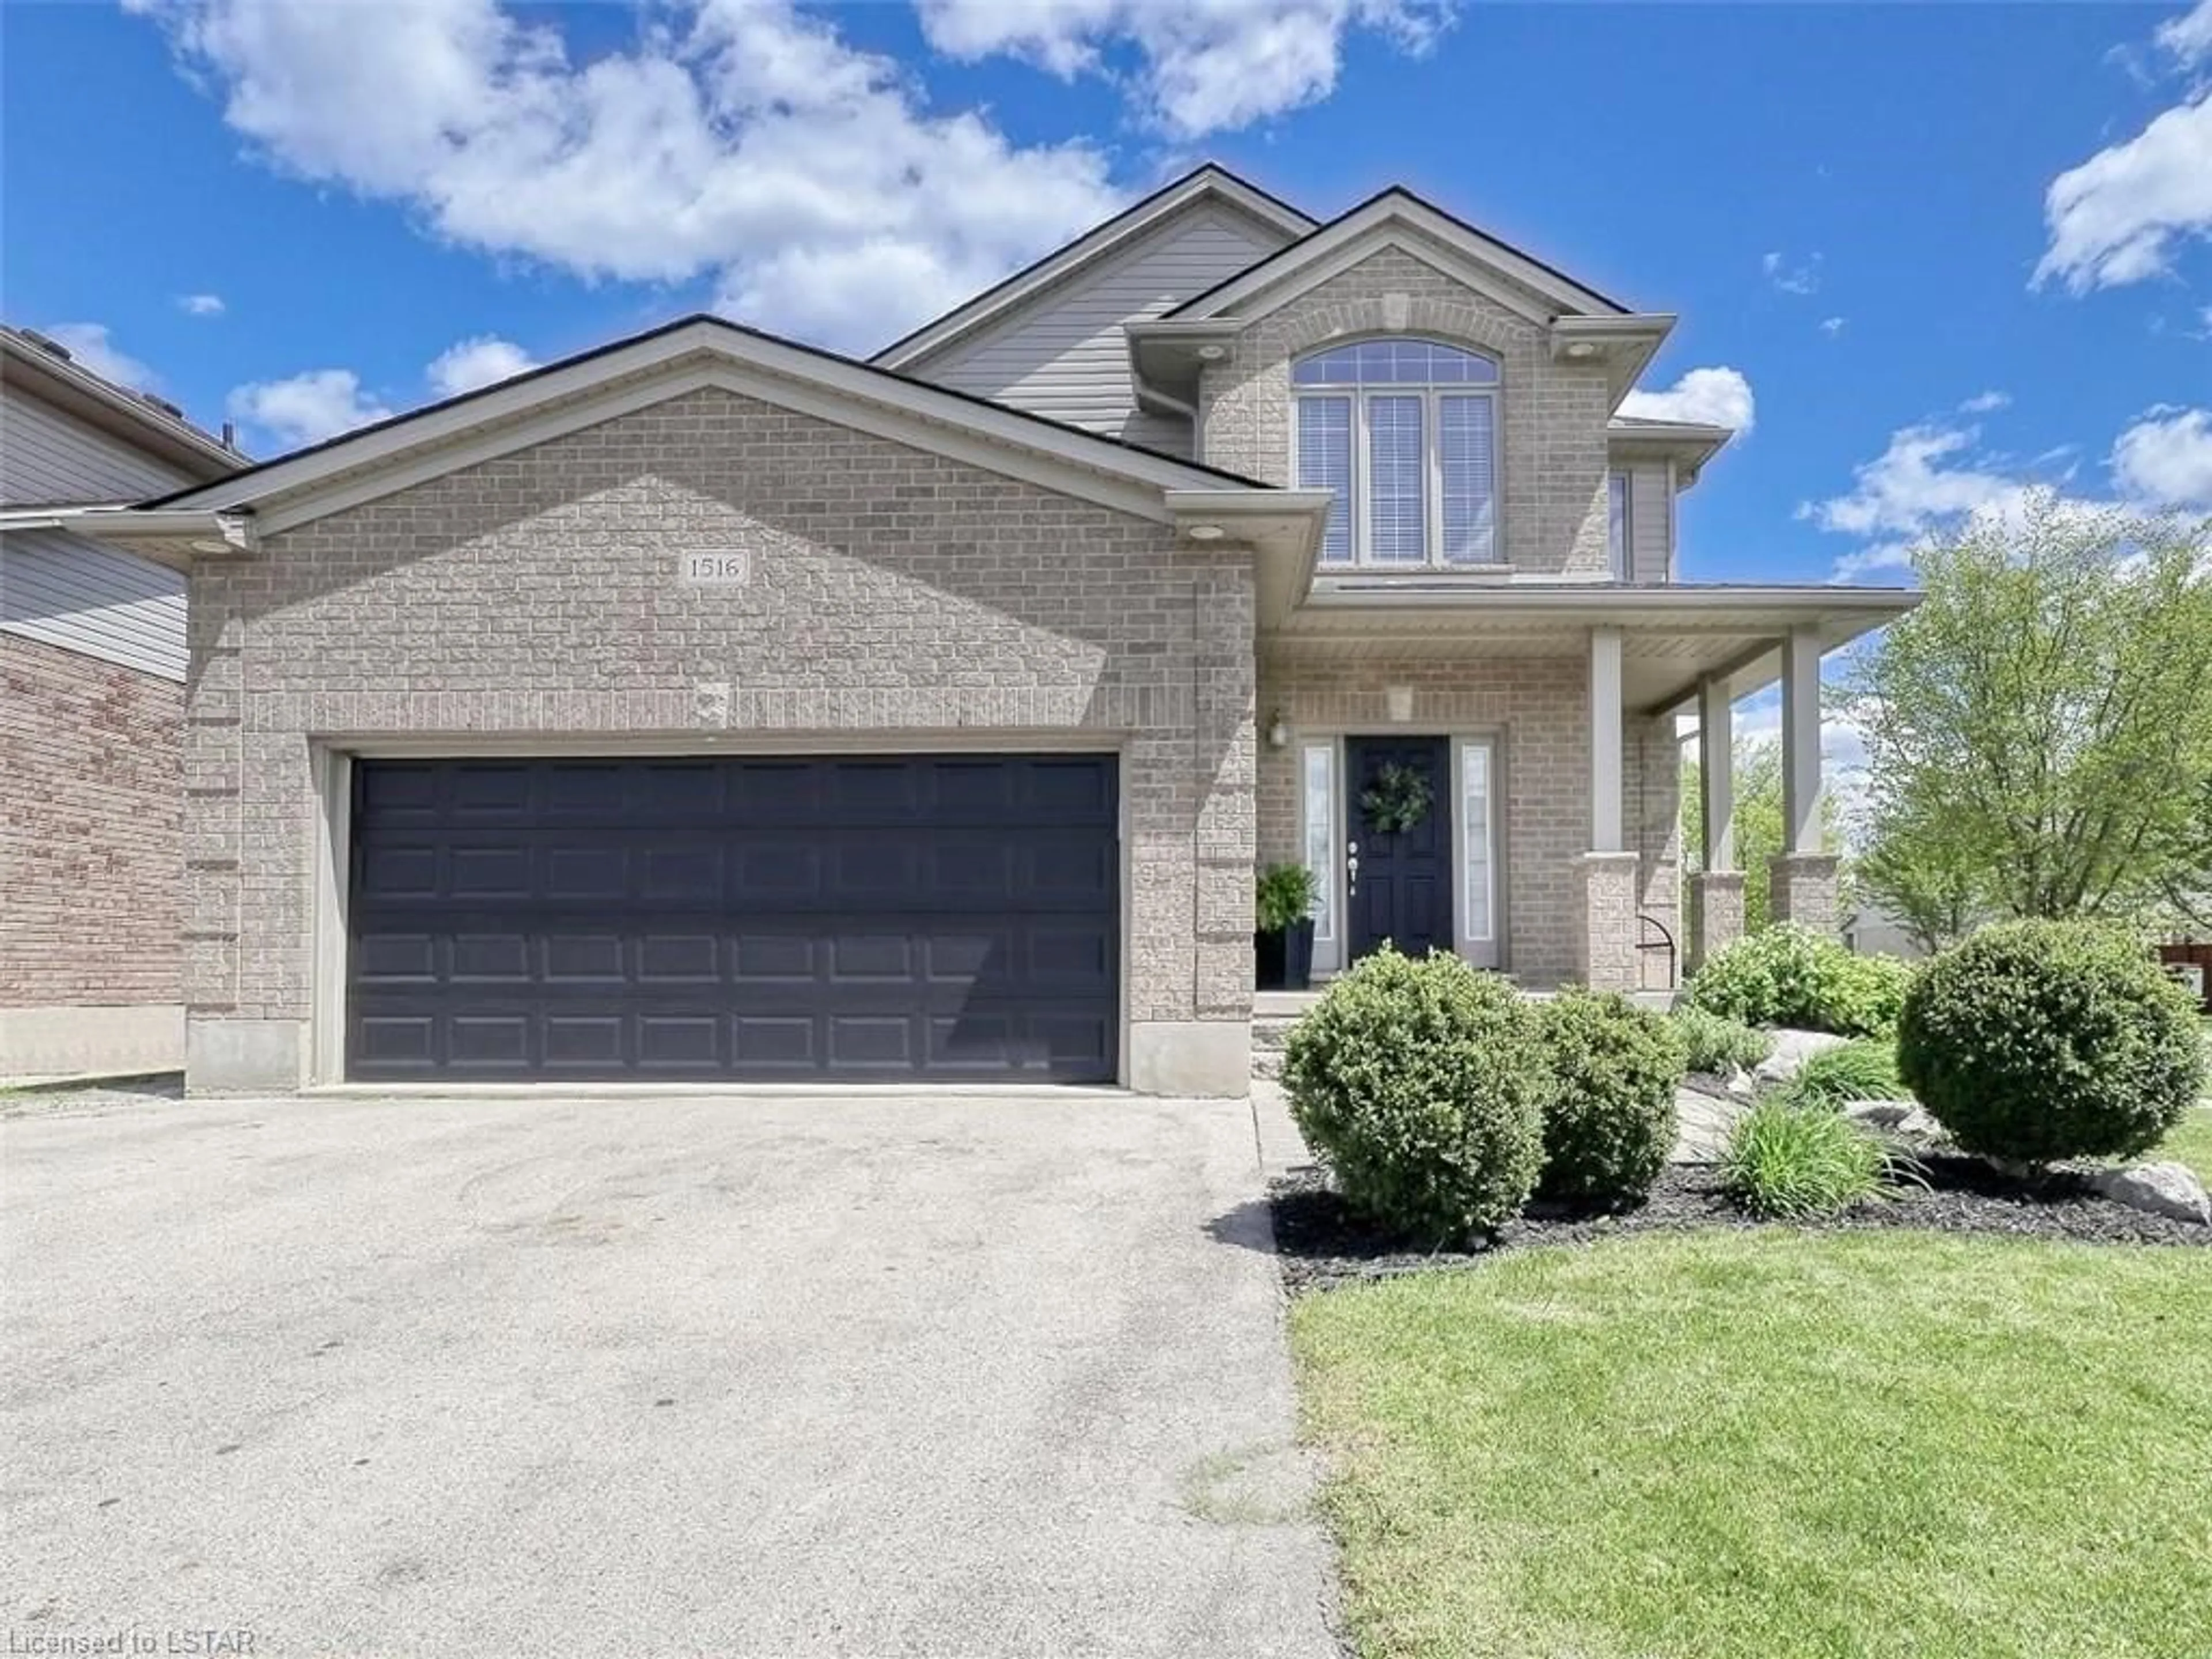 Home with brick exterior material for 1516 Coronation Dr, London Ontario N6G 5P6